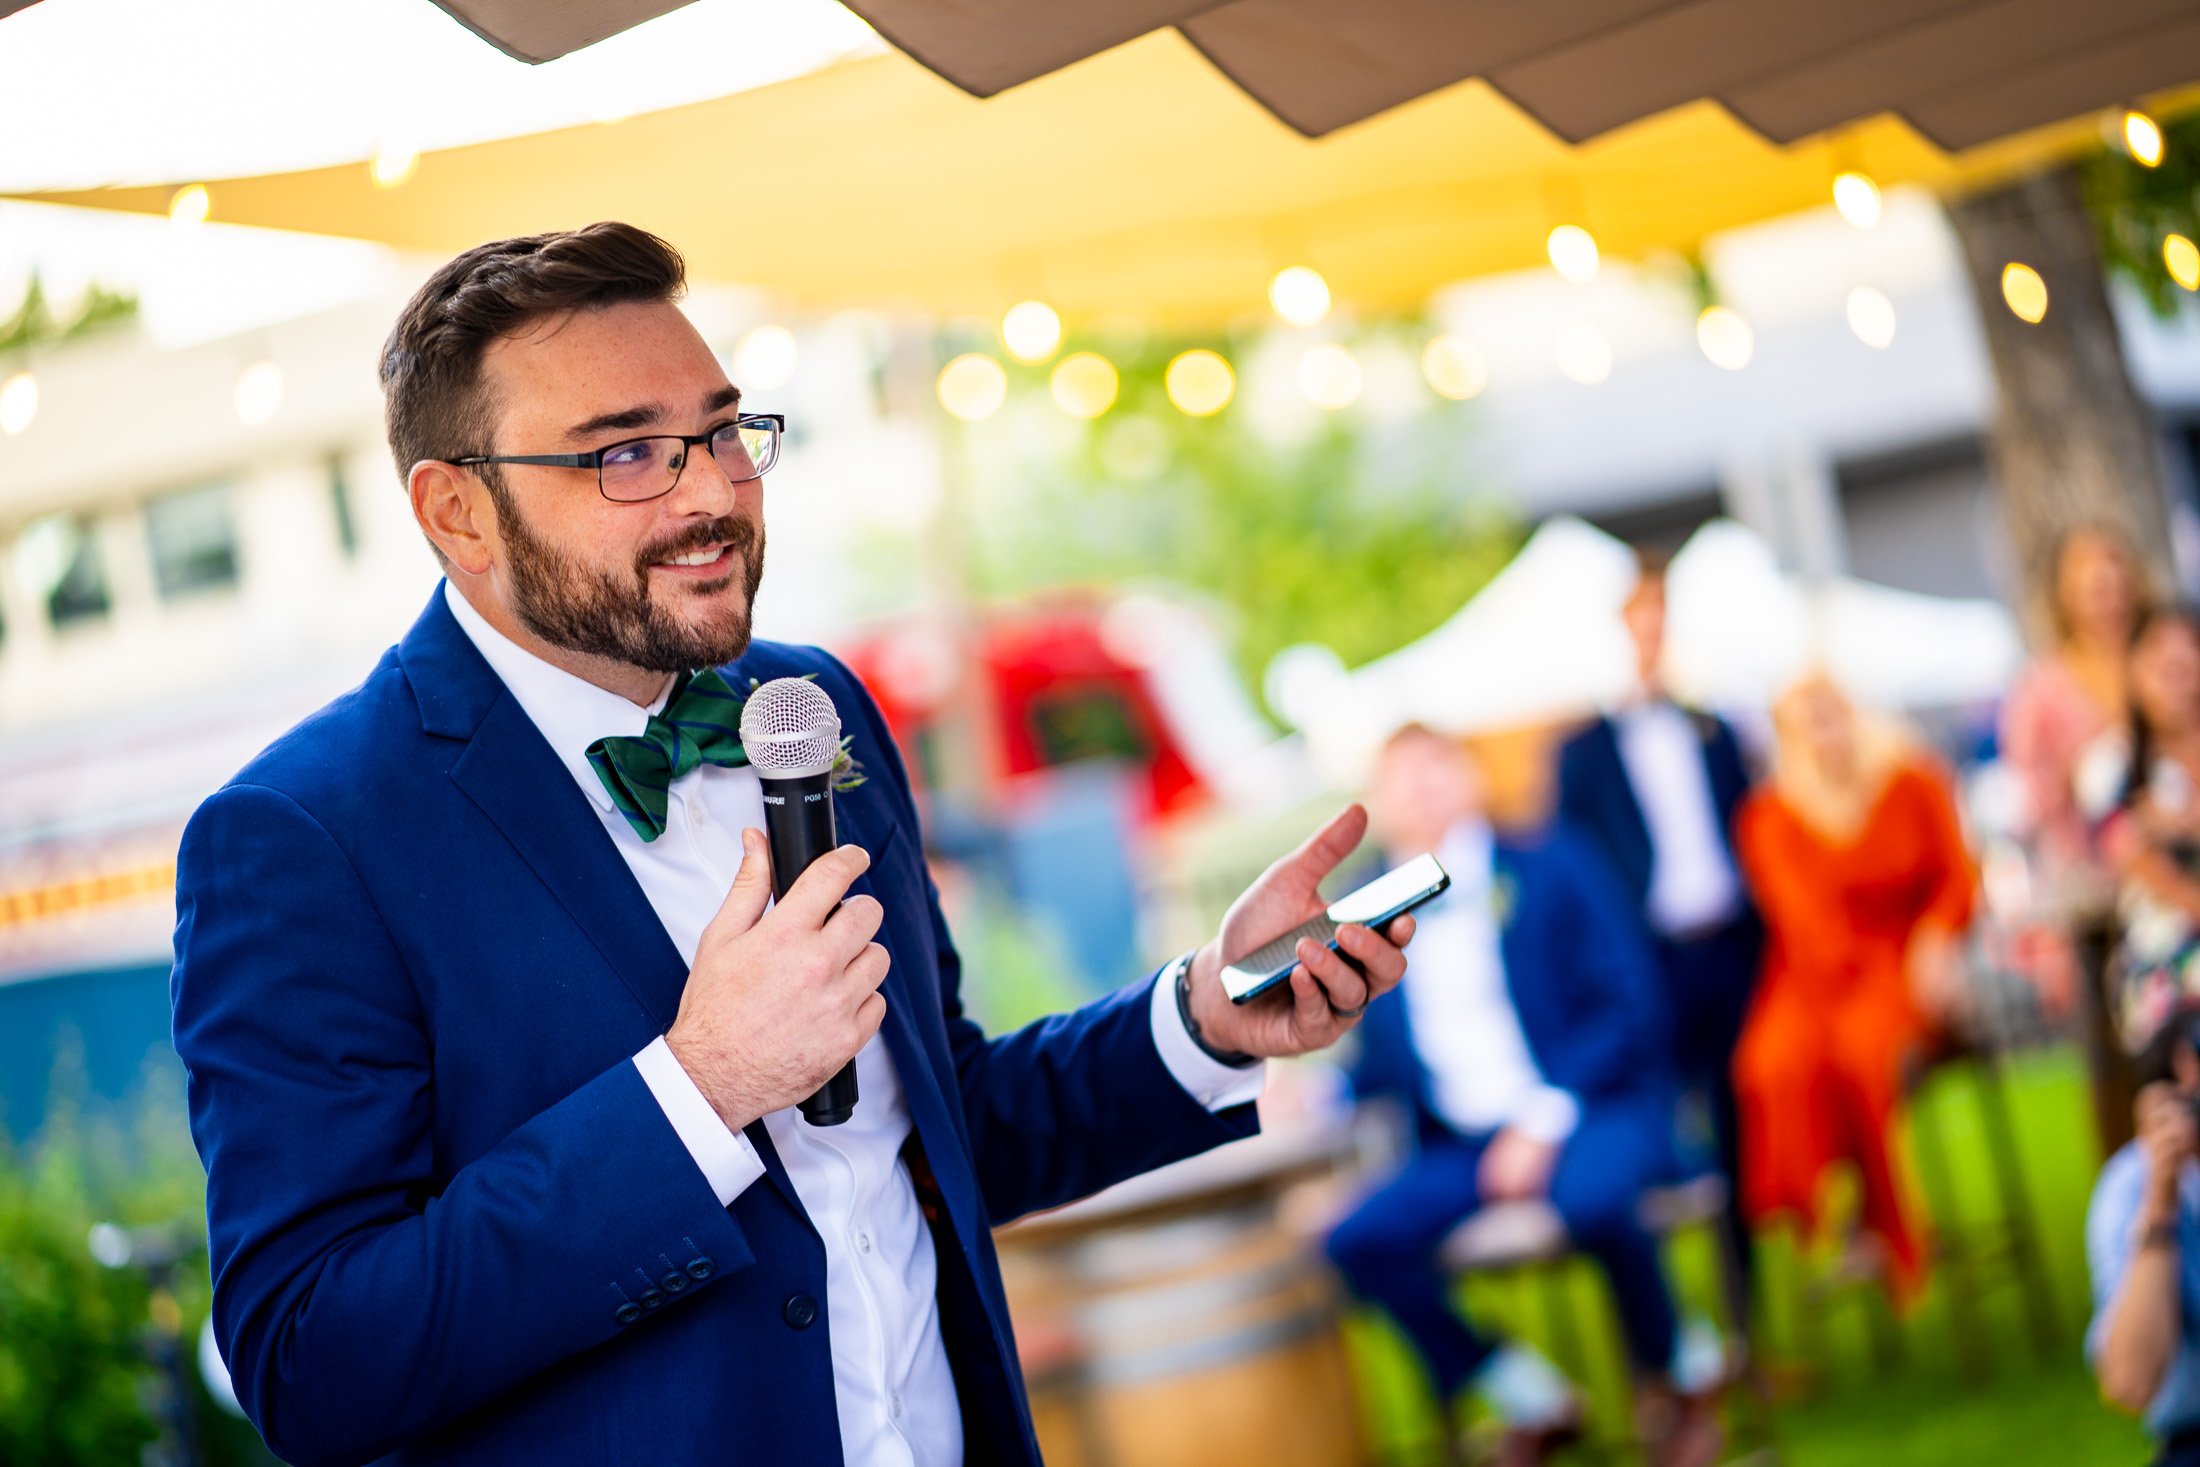 Best man gives a speech while standing on an outdoor patio during the wedding reception, wedding, wedding photos, wedding photography, wedding photographer, wedding inspiration, wedding photo inspiration, wedding portraits, wedding ceremony, wedding reception, mountain wedding, Catholic Church wedding, Catholic Church wedding photos, Catholic Church wedding photography, Catholic Church wedding photographer, Catholic Church wedding inspiration, Catholic Church wedding venue, Steamboat Springs wedding, Steamboat Springs wedding photos, Steamboat Springs wedding photography, Steamboat Springs wedding photographer, Colorado wedding, Colorado wedding photos, Colorado wedding photography, Colorado wedding photographer, Colorado mountain wedding, Colorado wedding inspiration